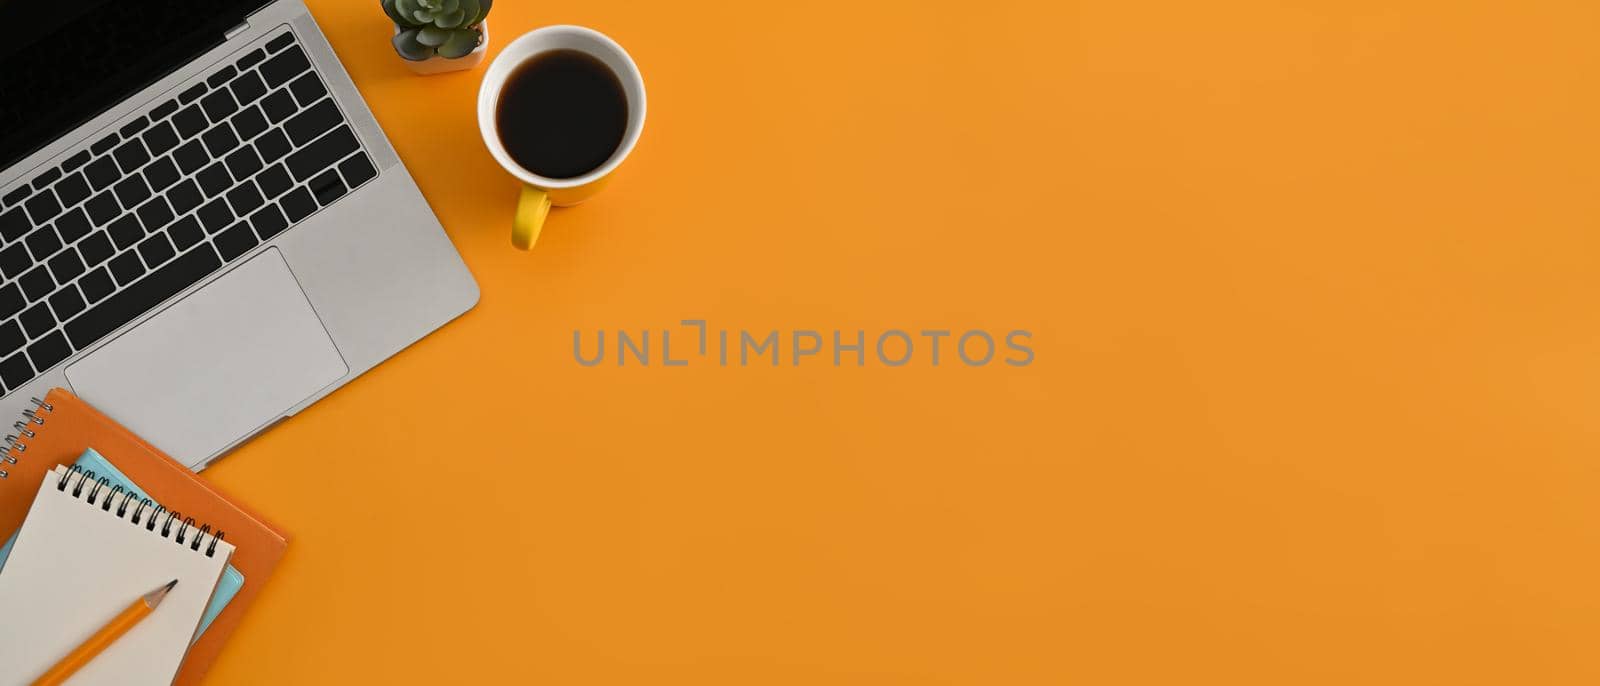 Computer laptop, coffee cup and notebook on yellow background with copy space. Horizontal photo, Top view.